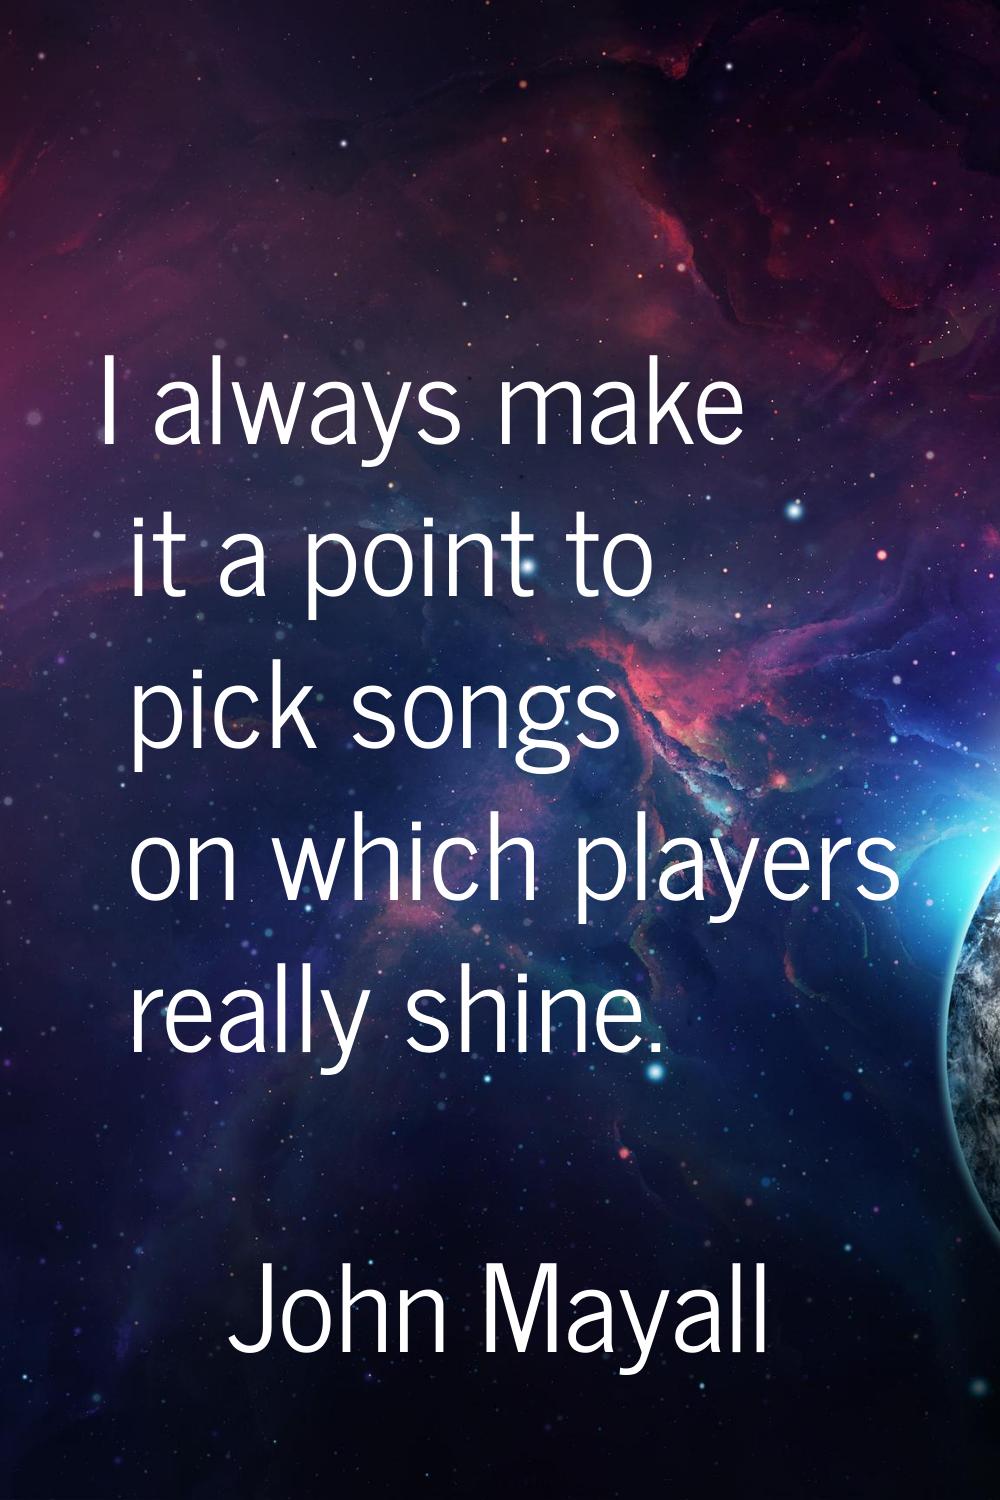 I always make it a point to pick songs on which players really shine.